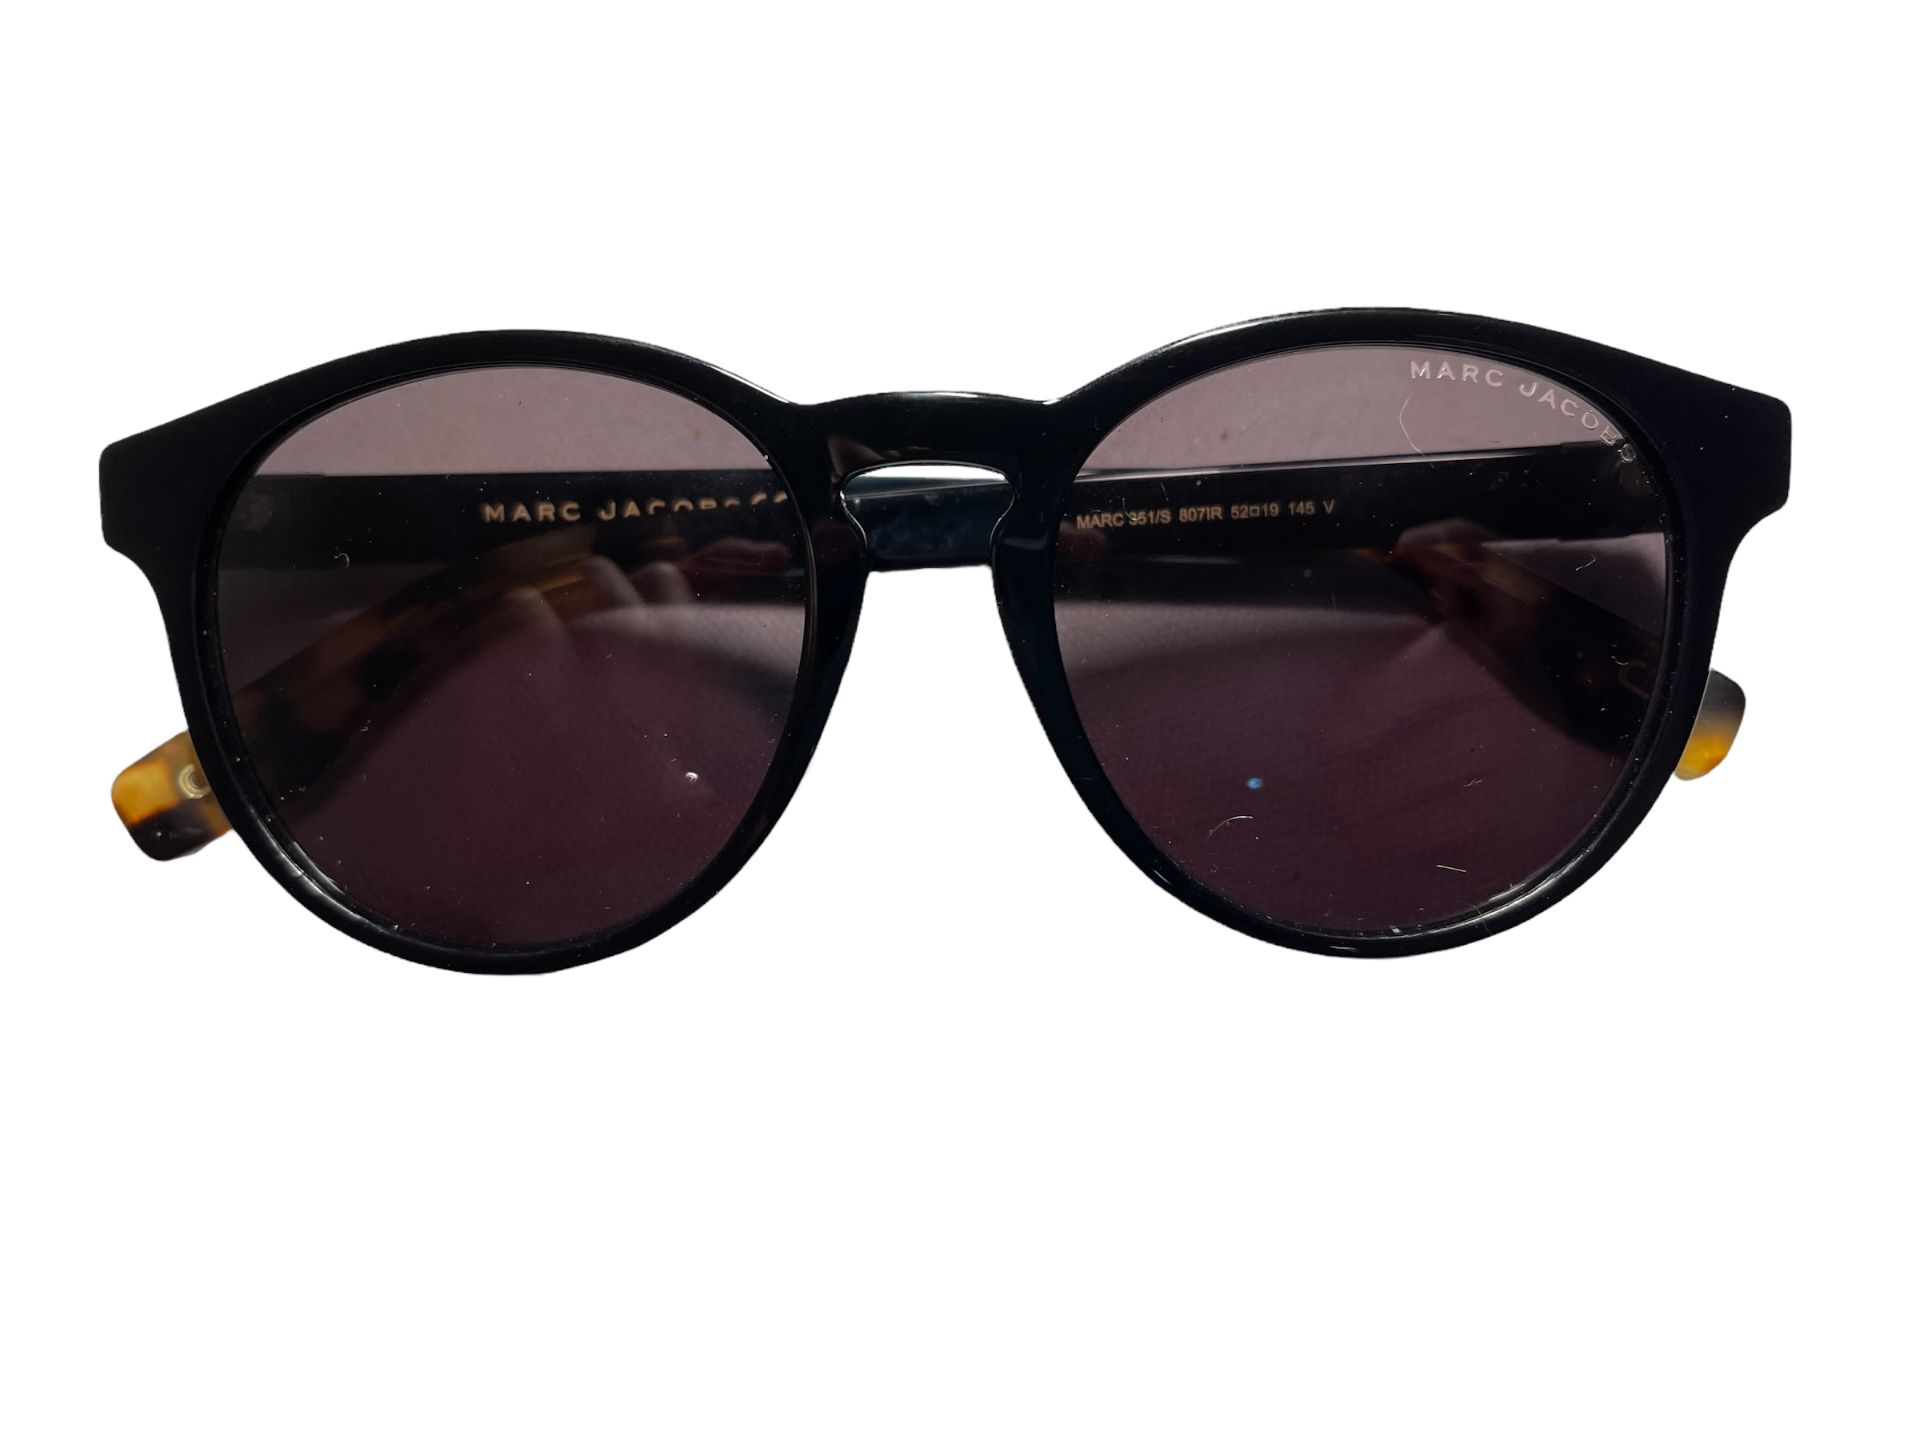 Marc Jacobs Ladies Sunglasses - Ex Demo or Surplus Stock from our Private Jet Charter - Image 2 of 10